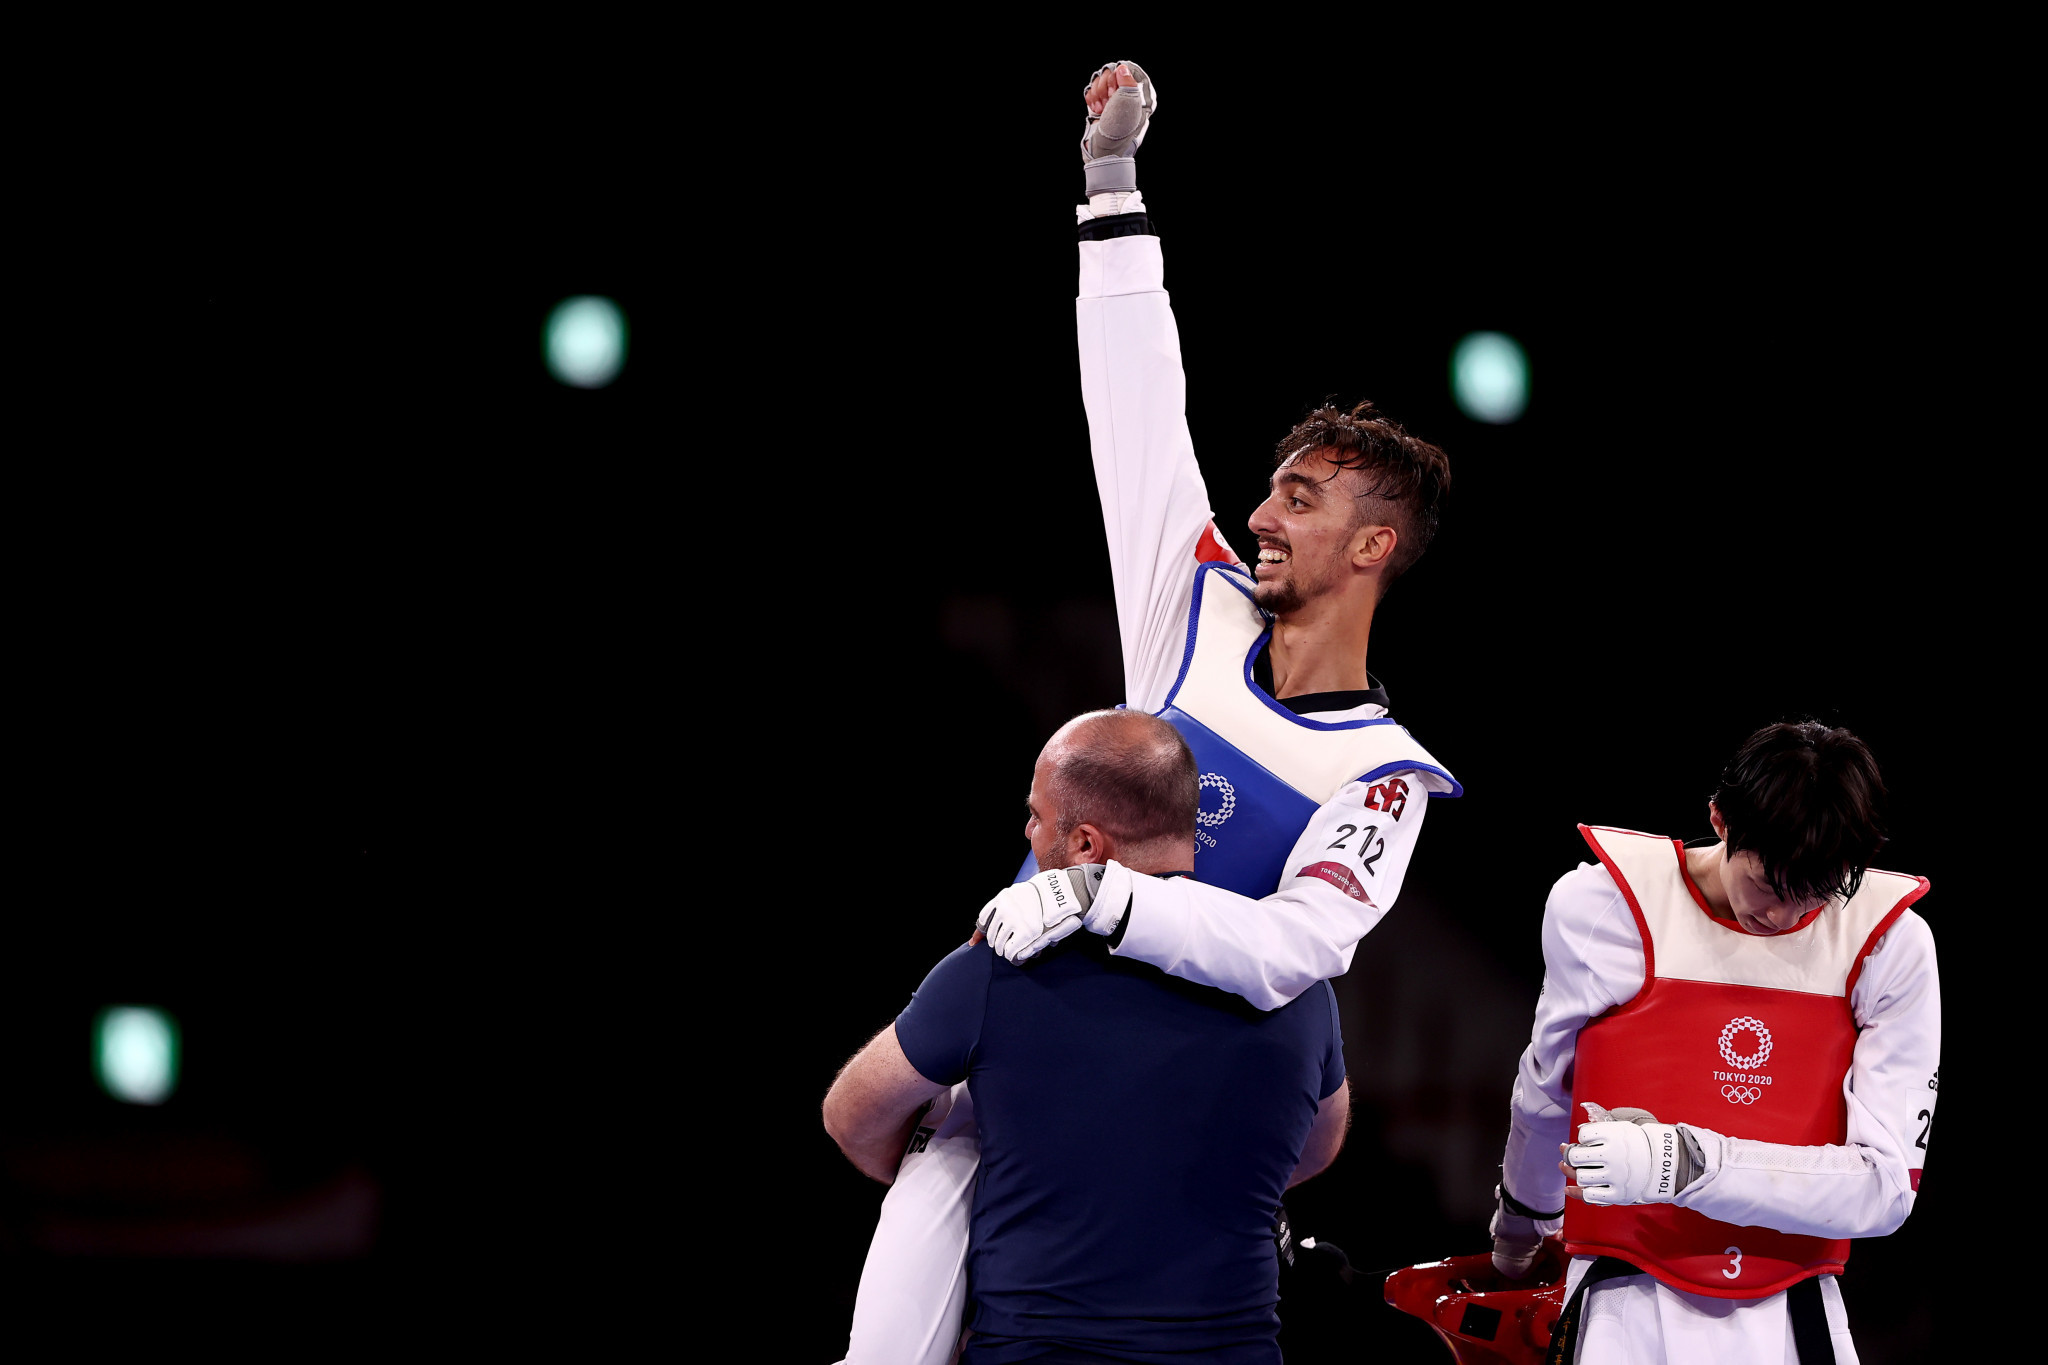 Mohamed Khalil Jendoubi won Olympic silver for Tunisia at Tokyo 2020 ©Getty Images